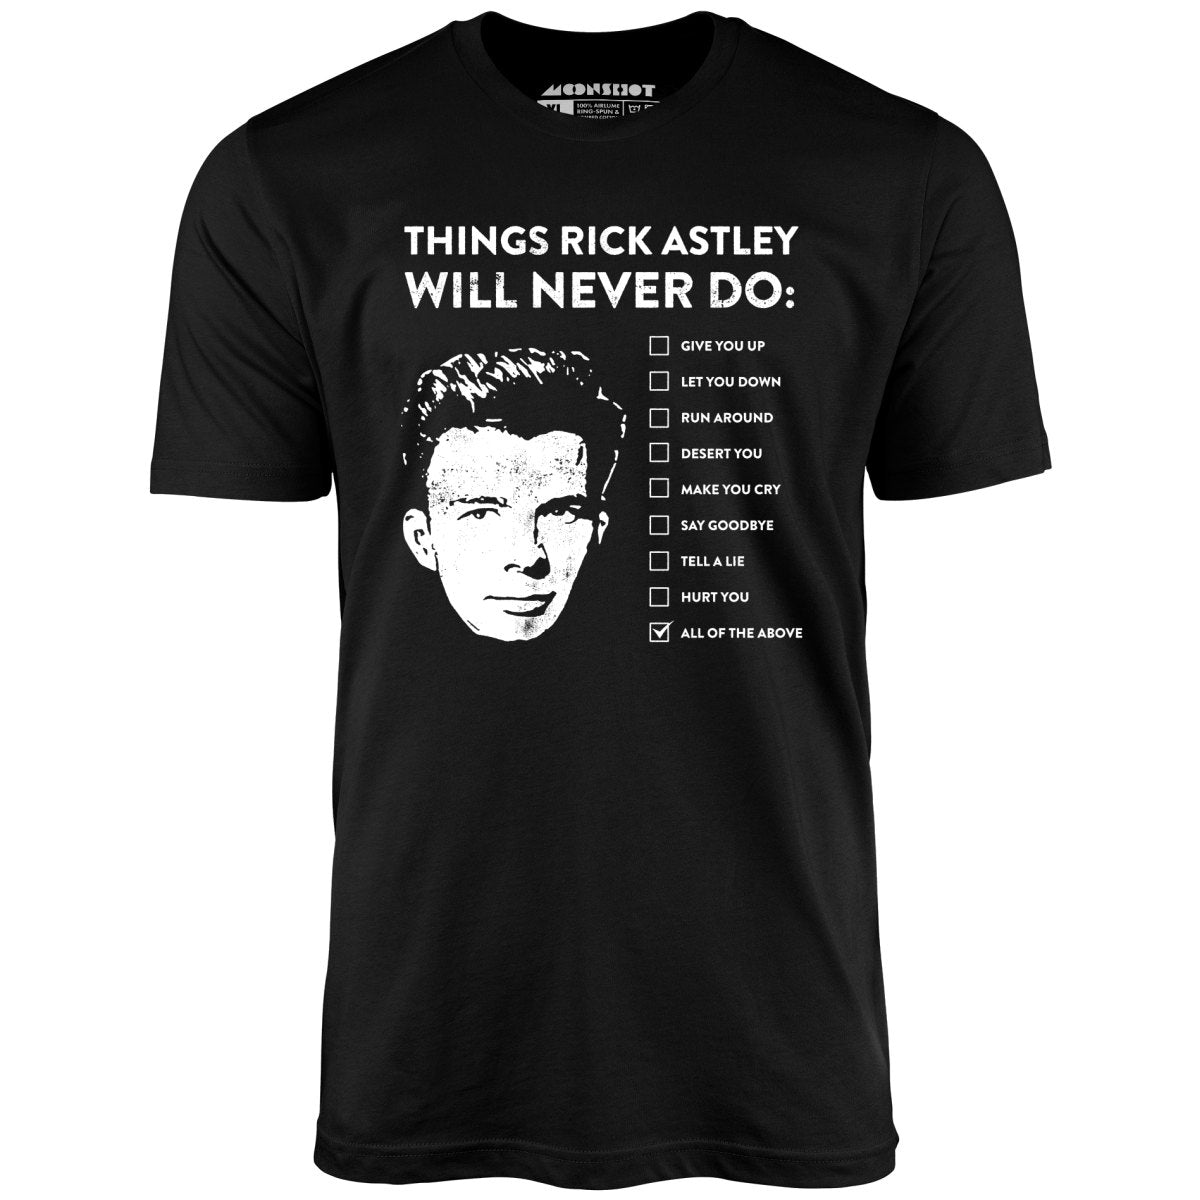 Things Rick Astley Will Never Do - Unisex T-Shirt